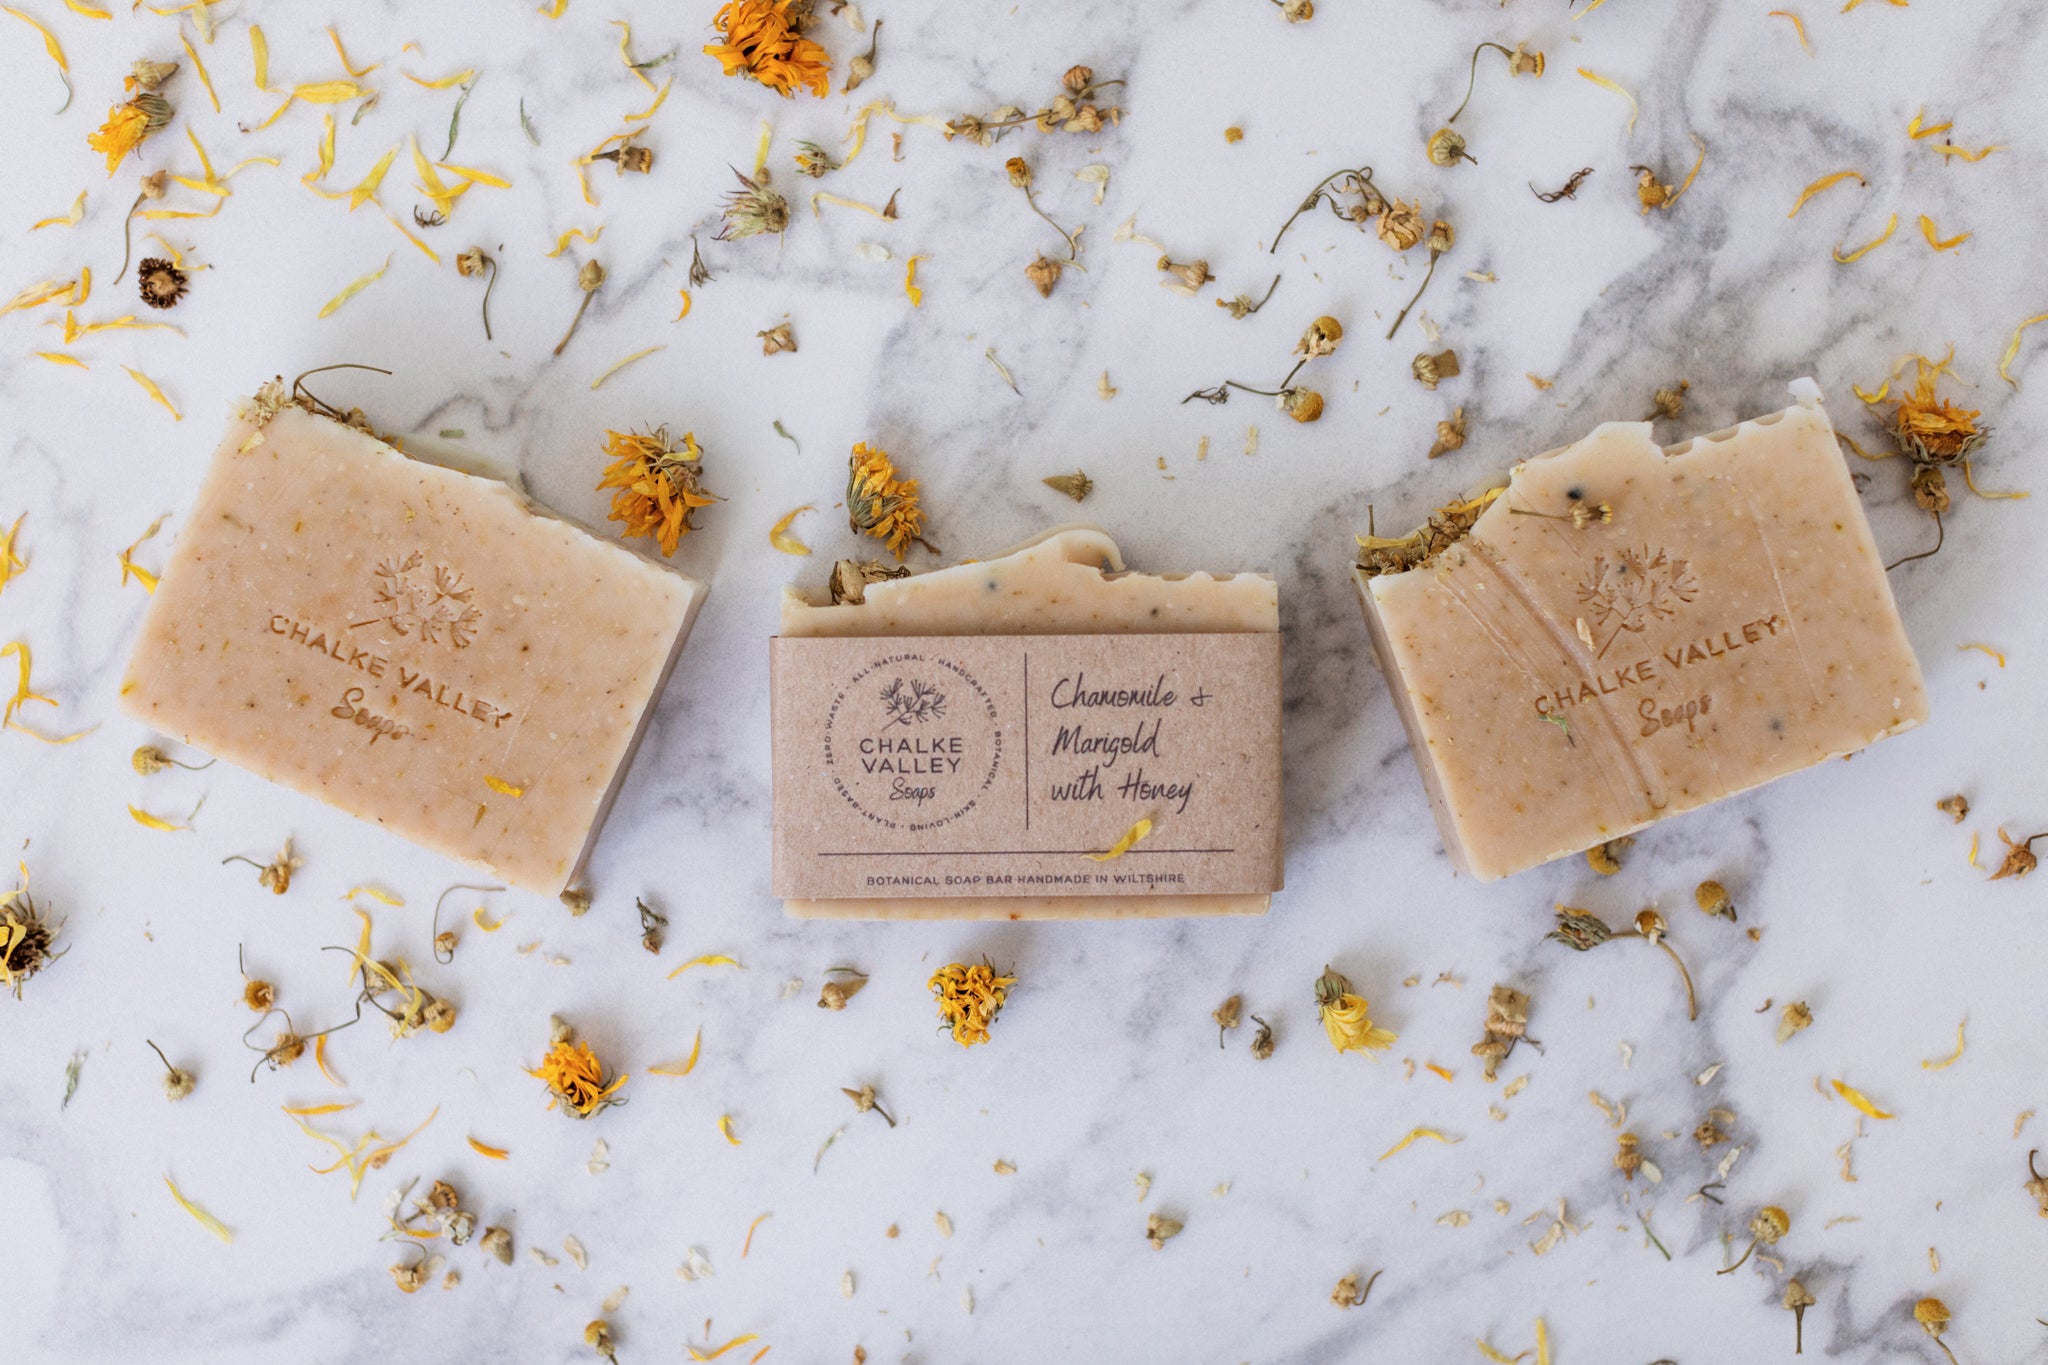 Luxurious natural soap bars - Honey Meadow - by Chalke Valley Soaps